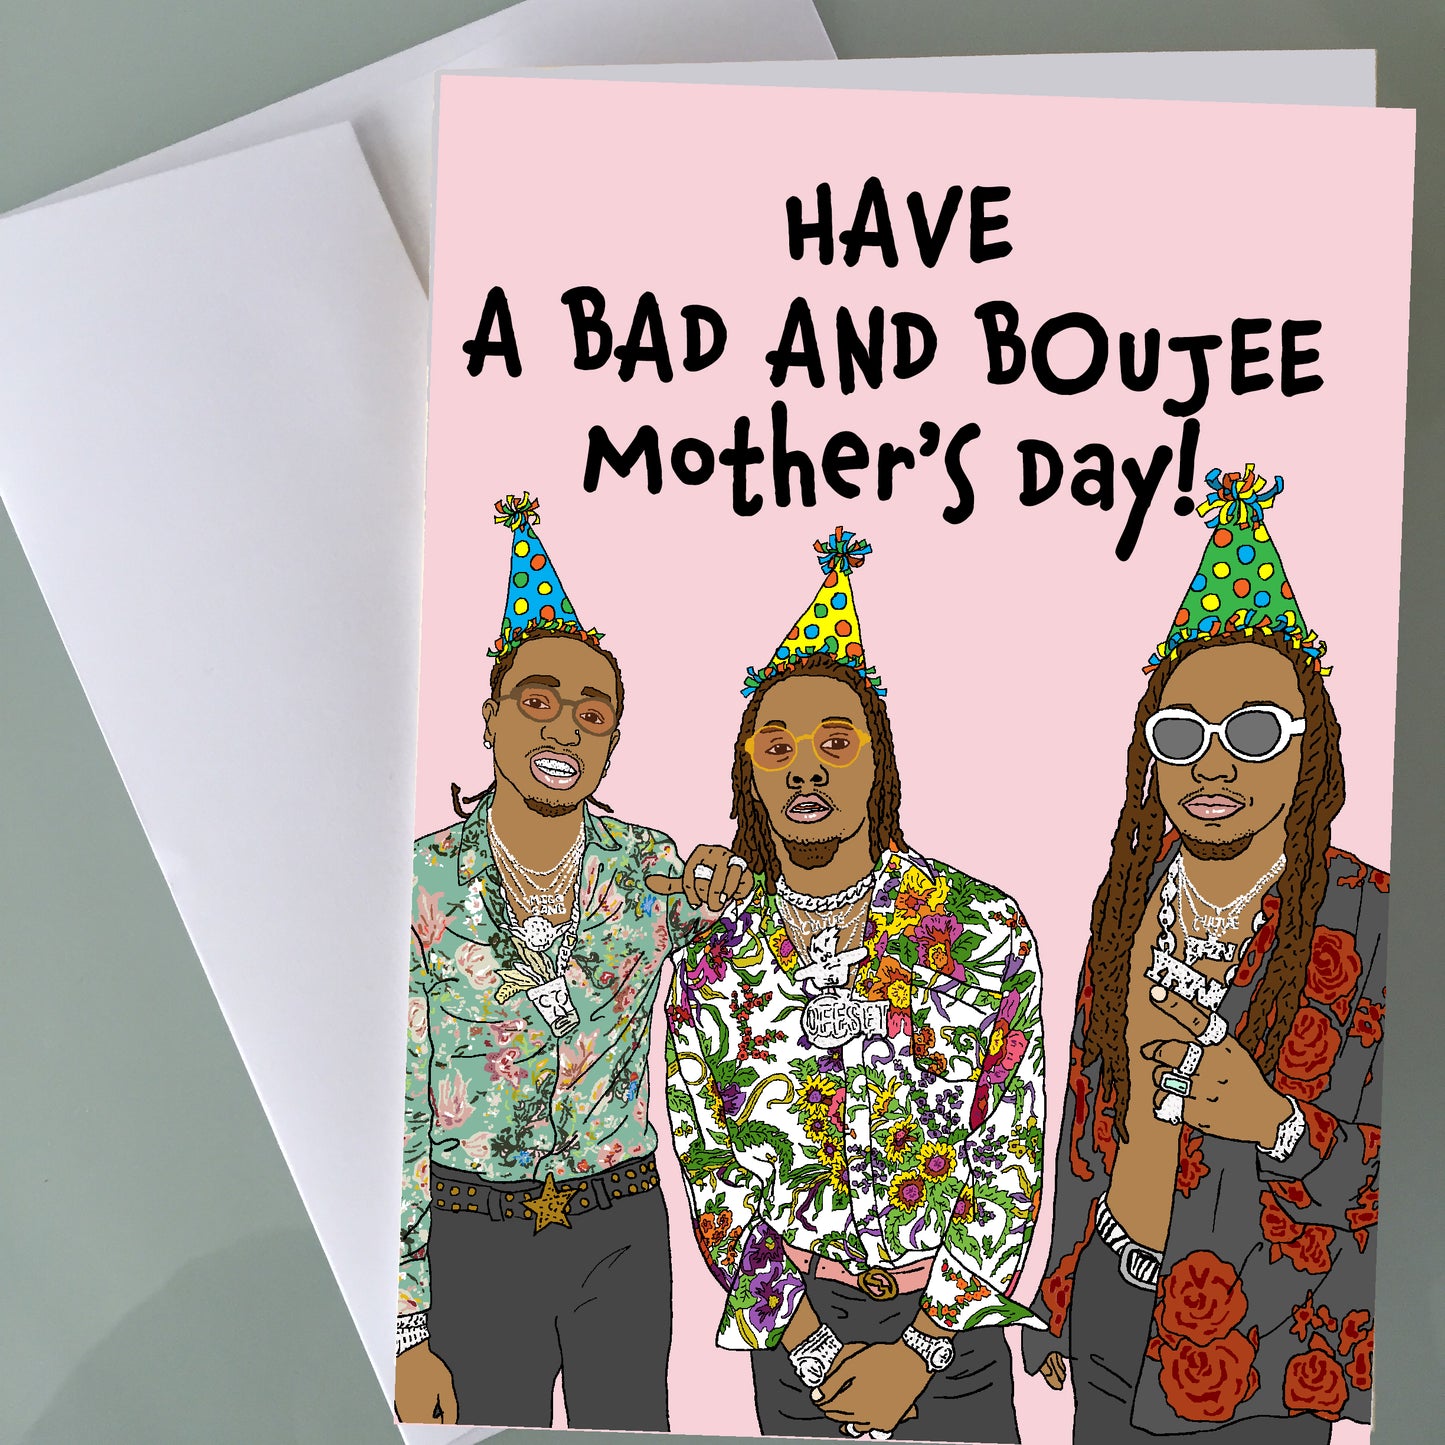 Migos Mother's Day Card - Bad and Boujee